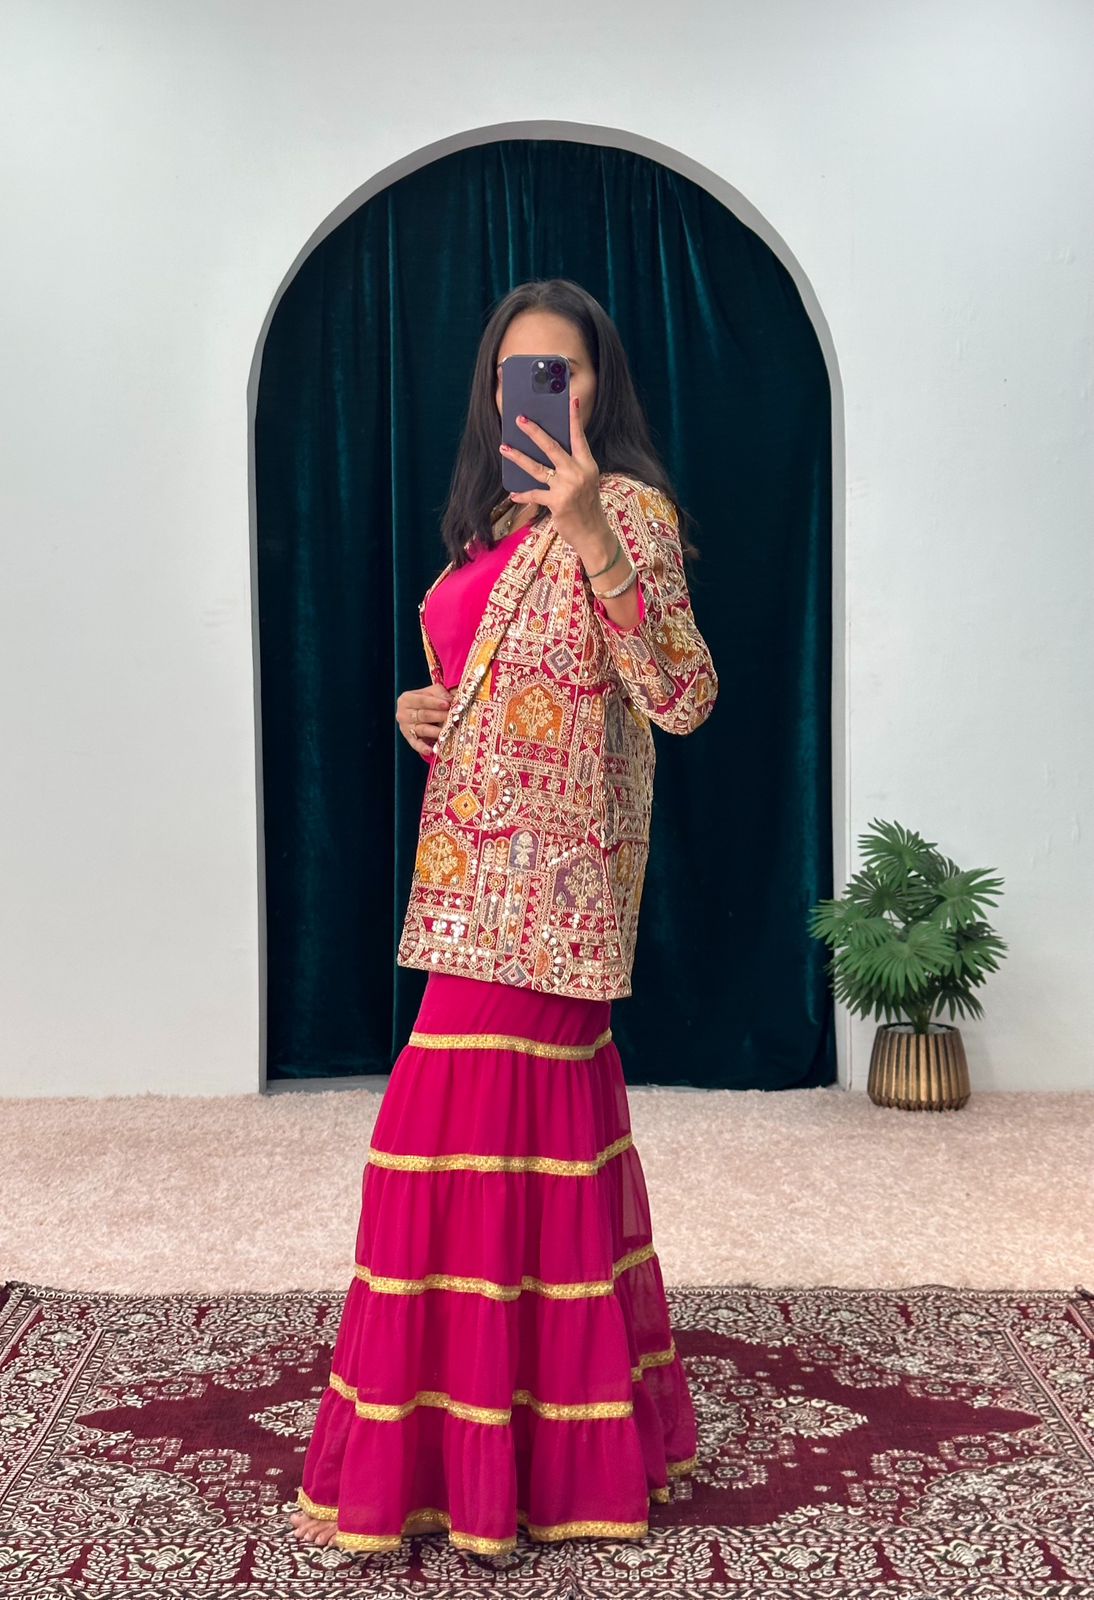 Outstanding Pink Color Top With Sharara And Jacket